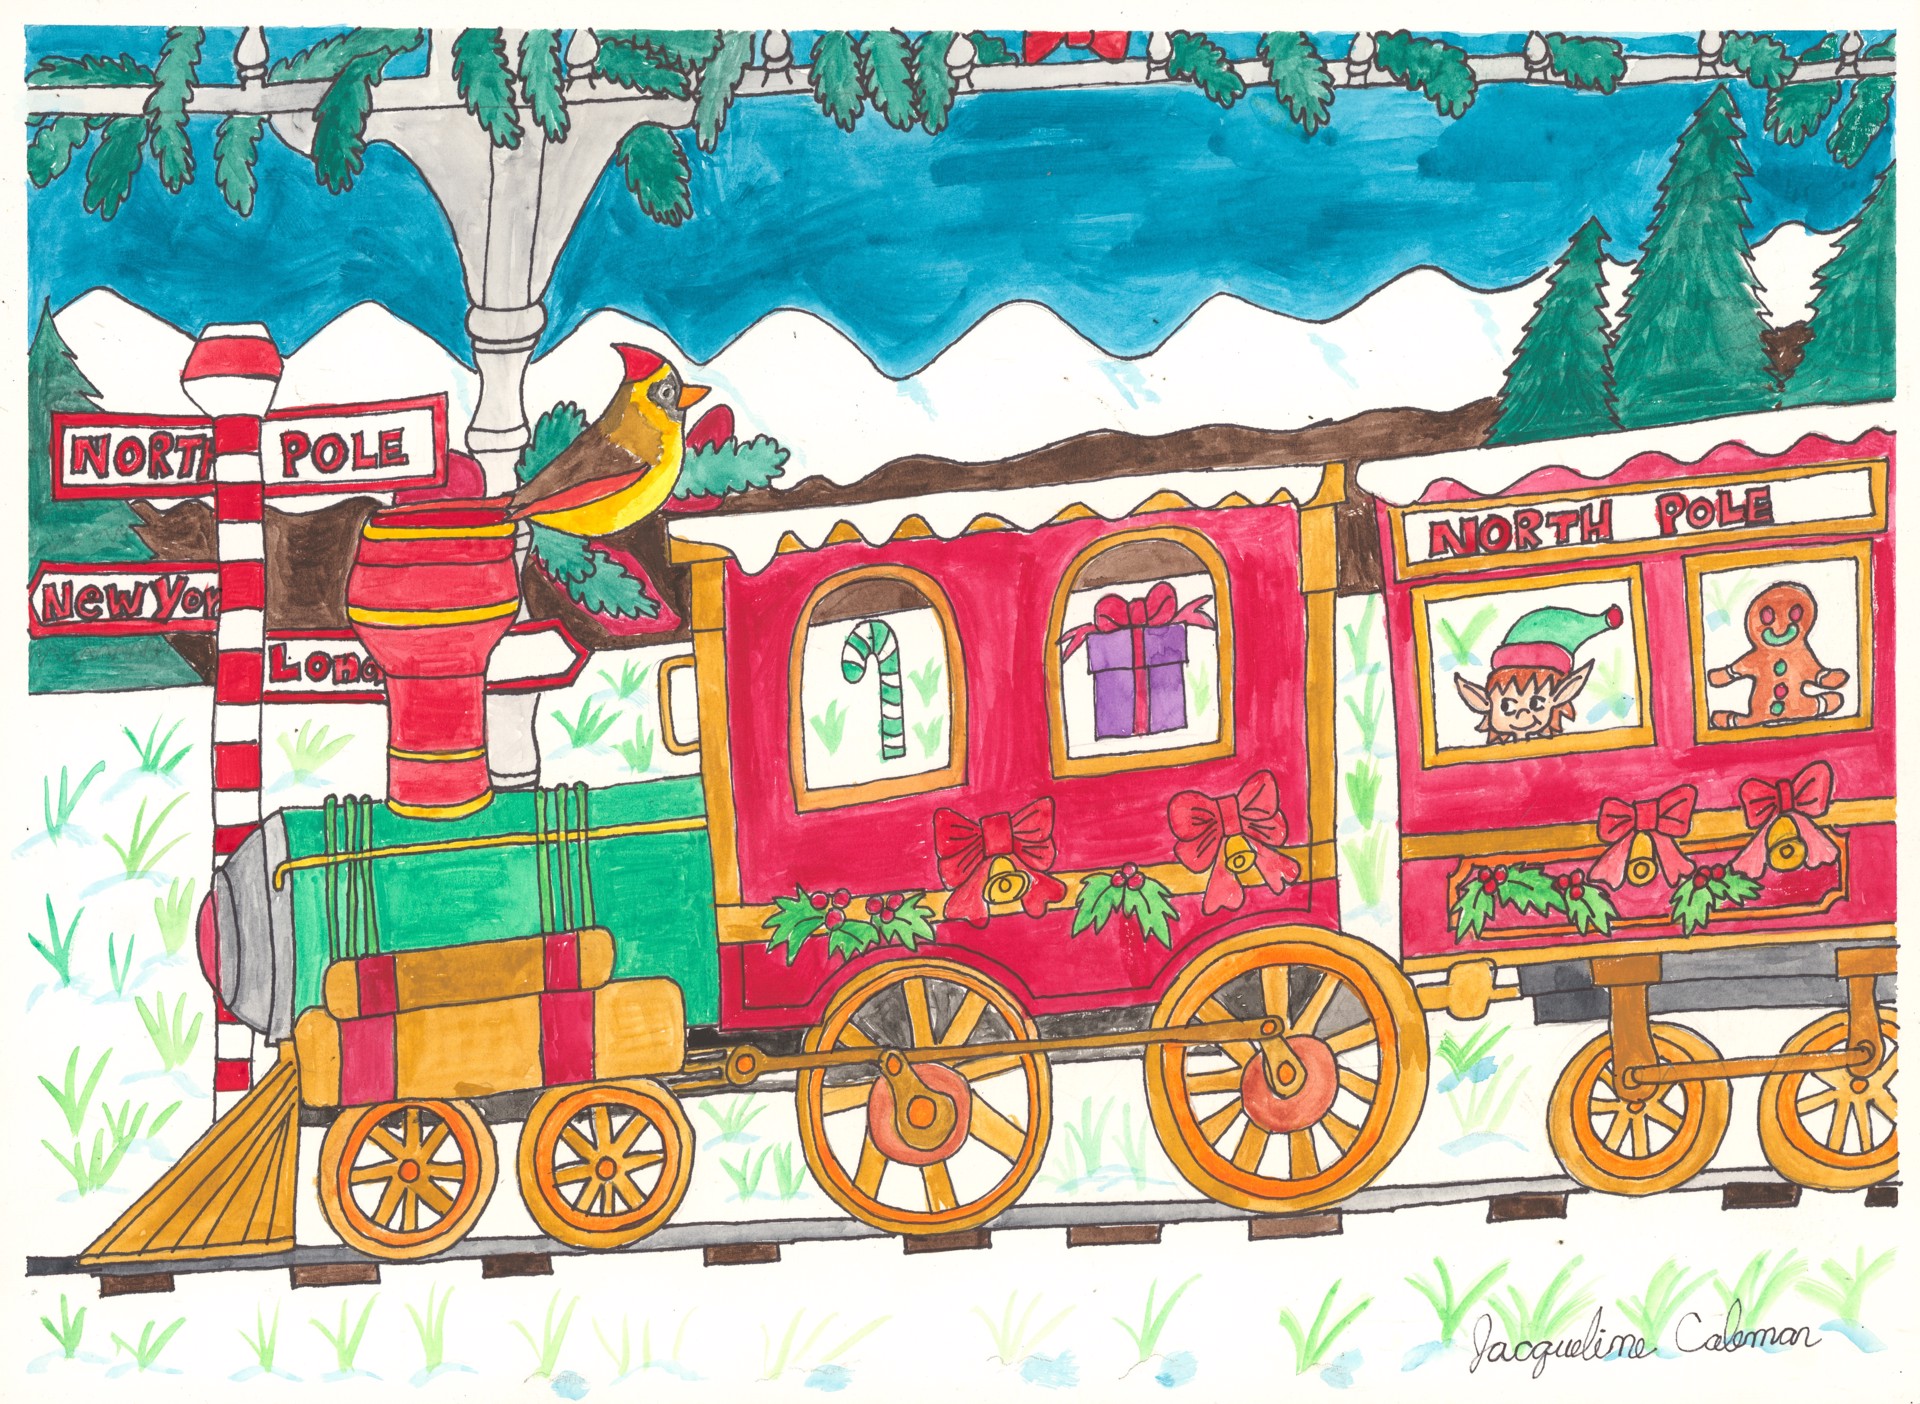 Train to the North Pole by Jacqueline Coleman